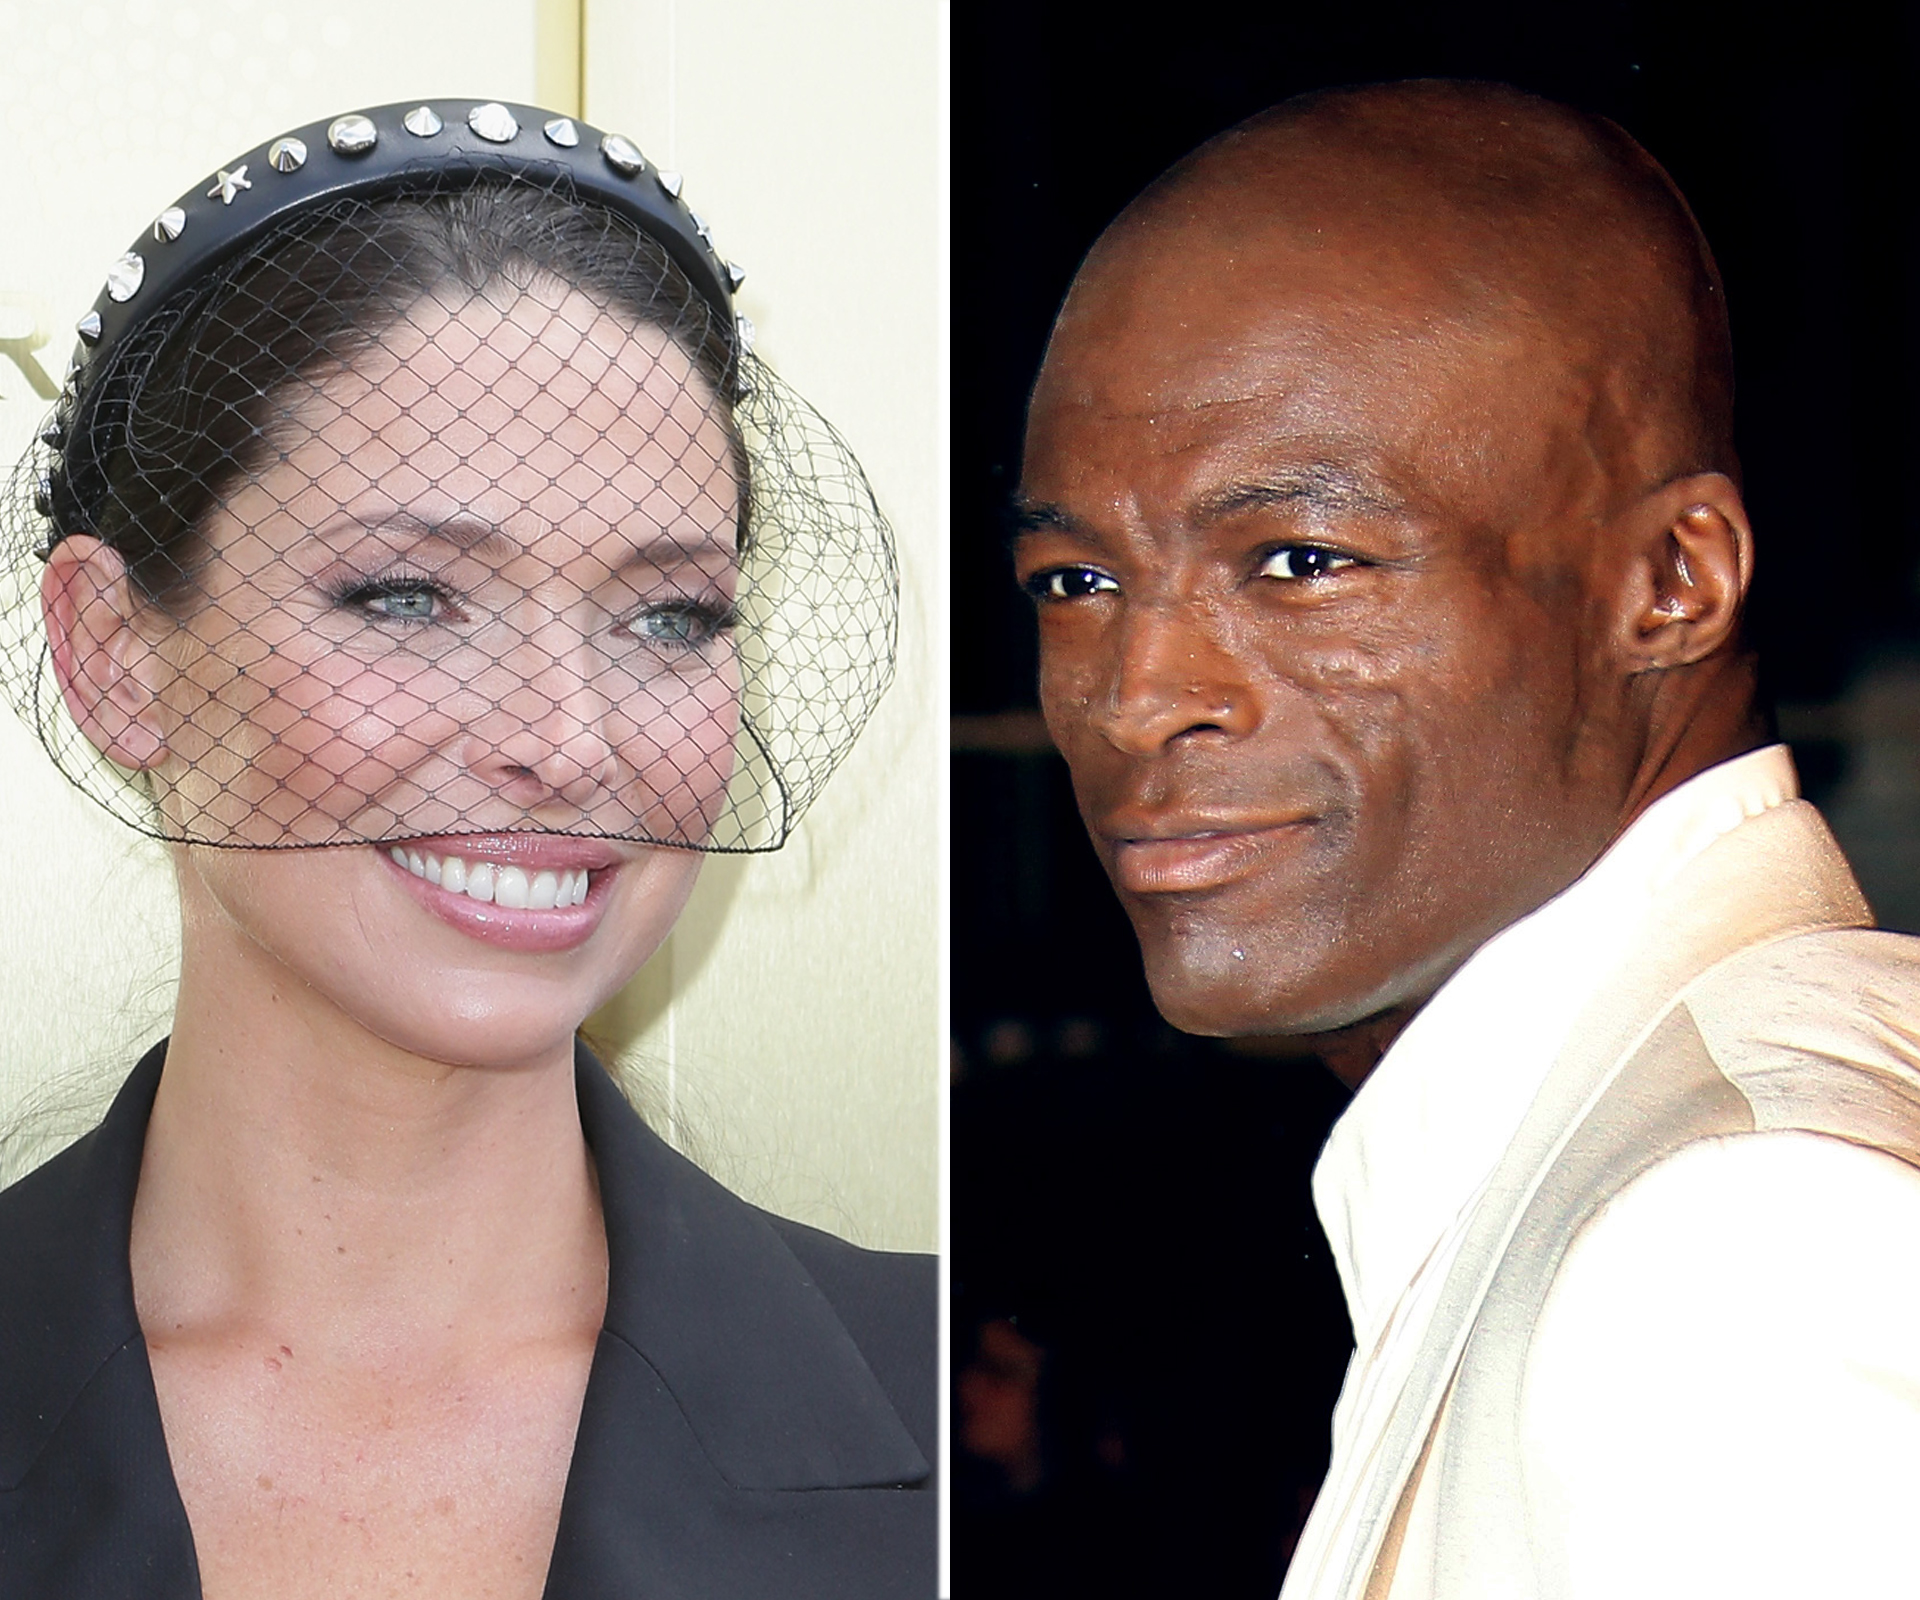 Erica Packer, James Packer’s ex, is dating Seal